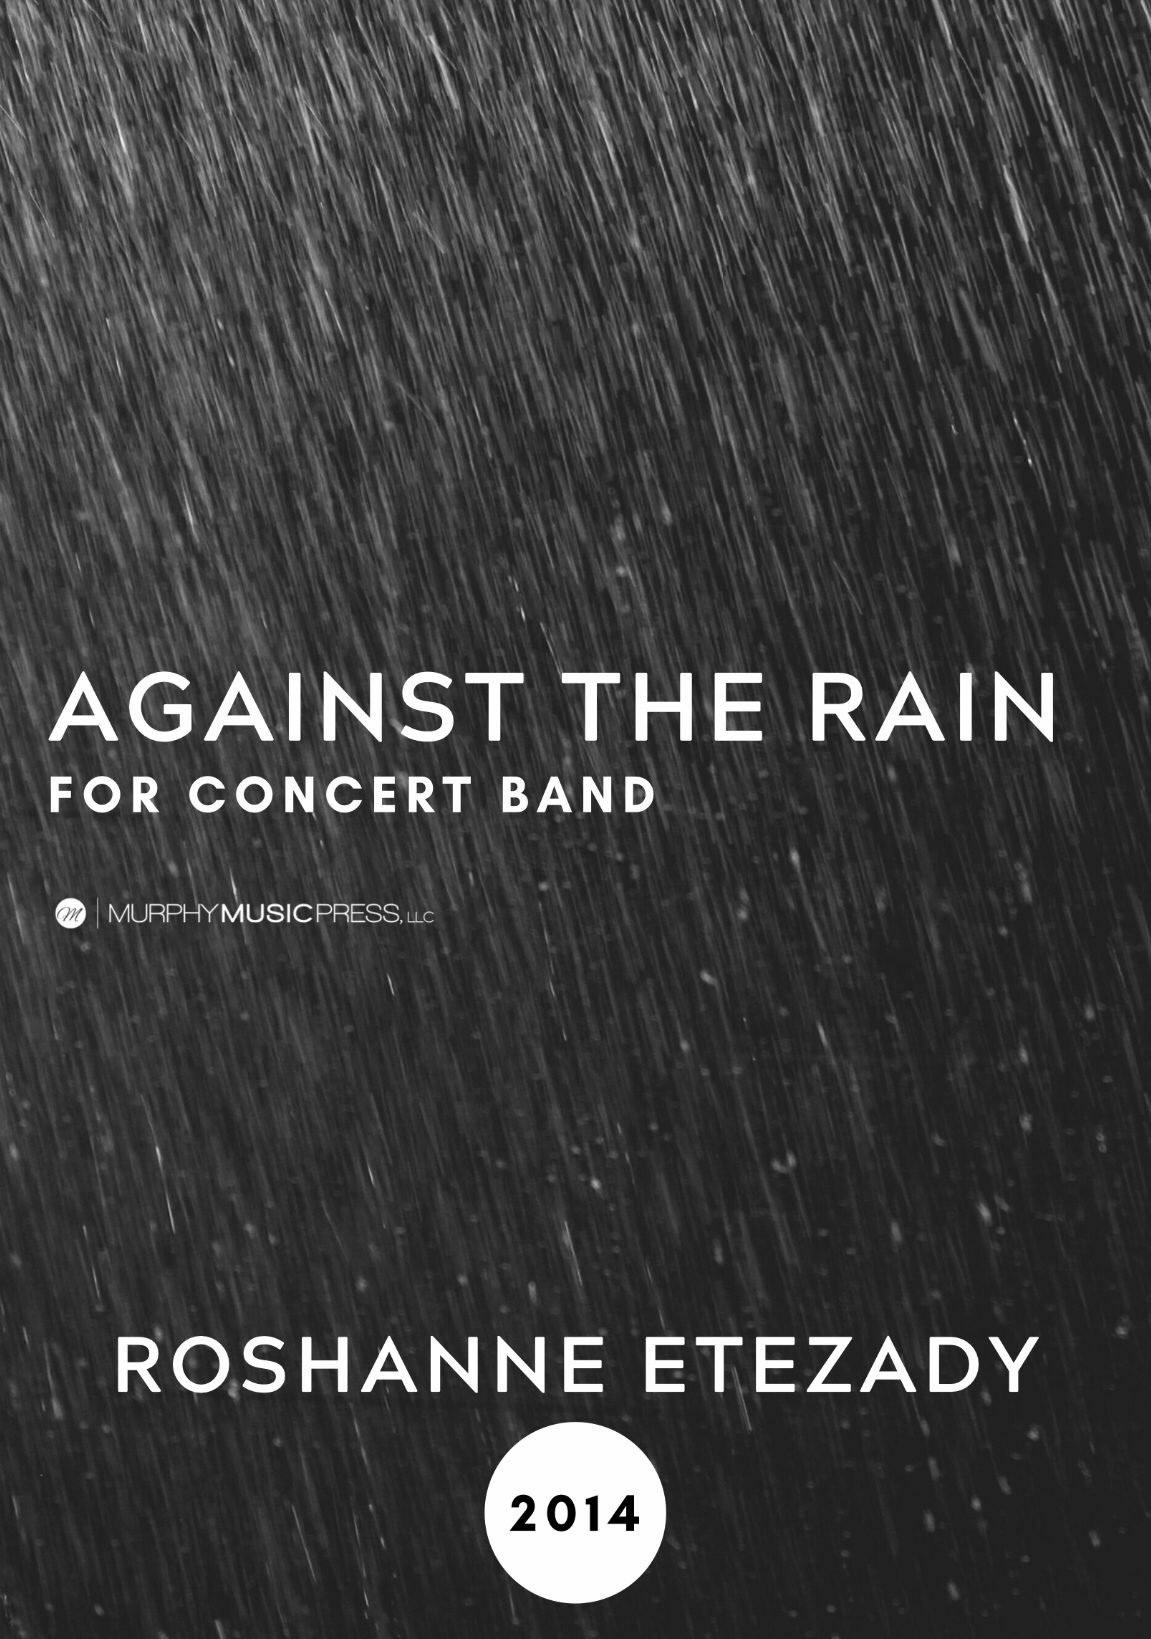 Against The Rain by Roshanne Etezady